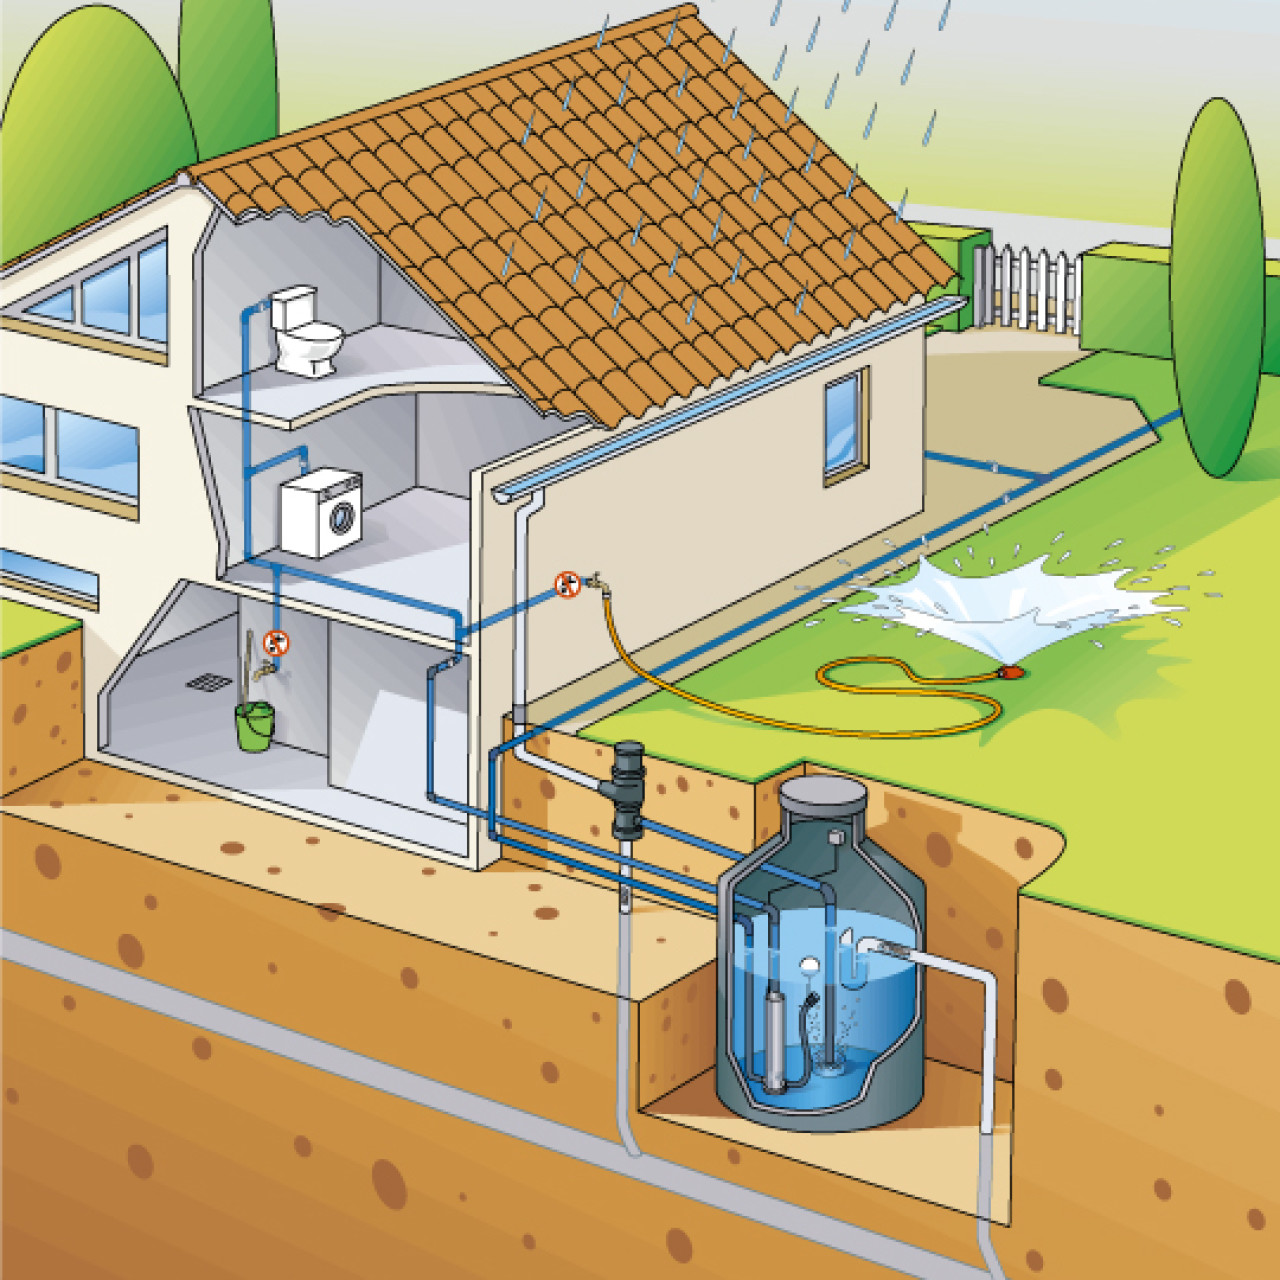 How to collect rainwater?